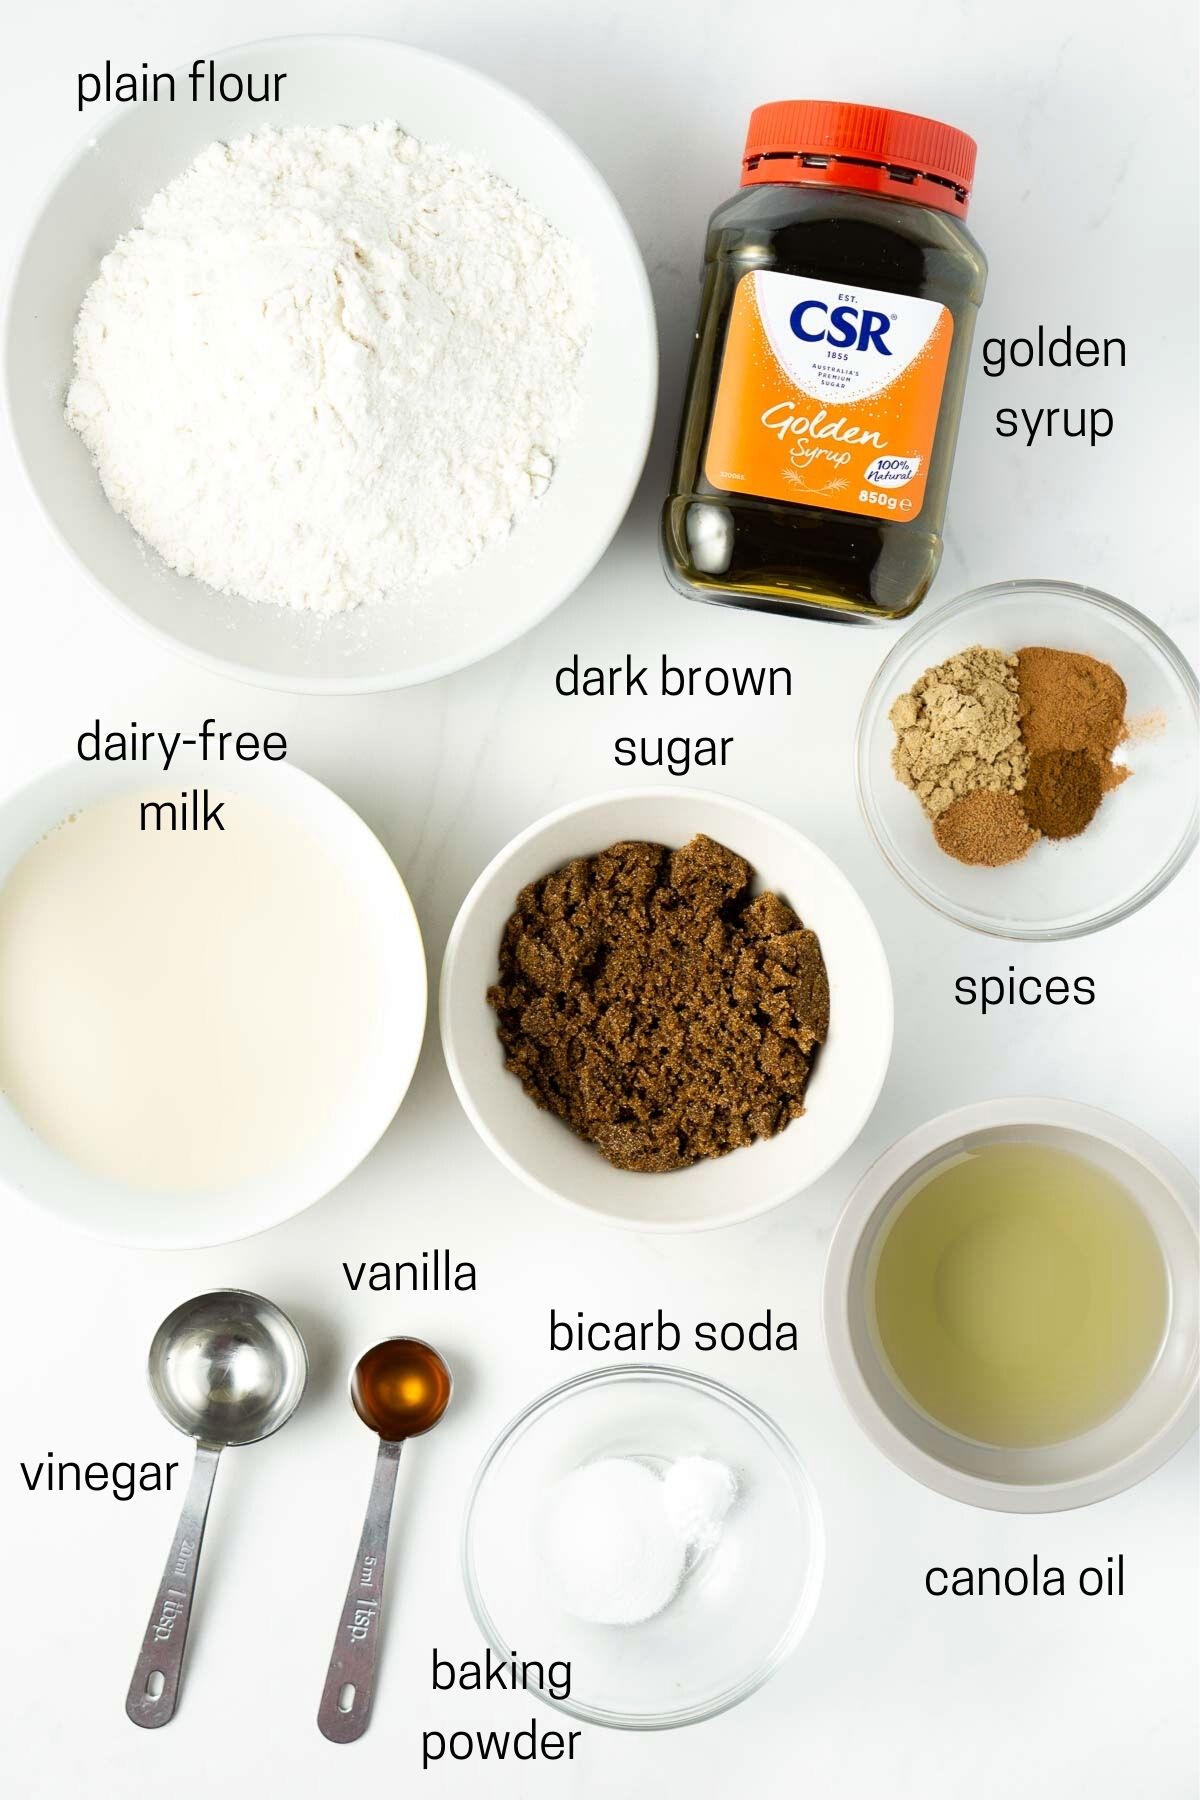 All ingredients laid out to make gingerbread cupcakes